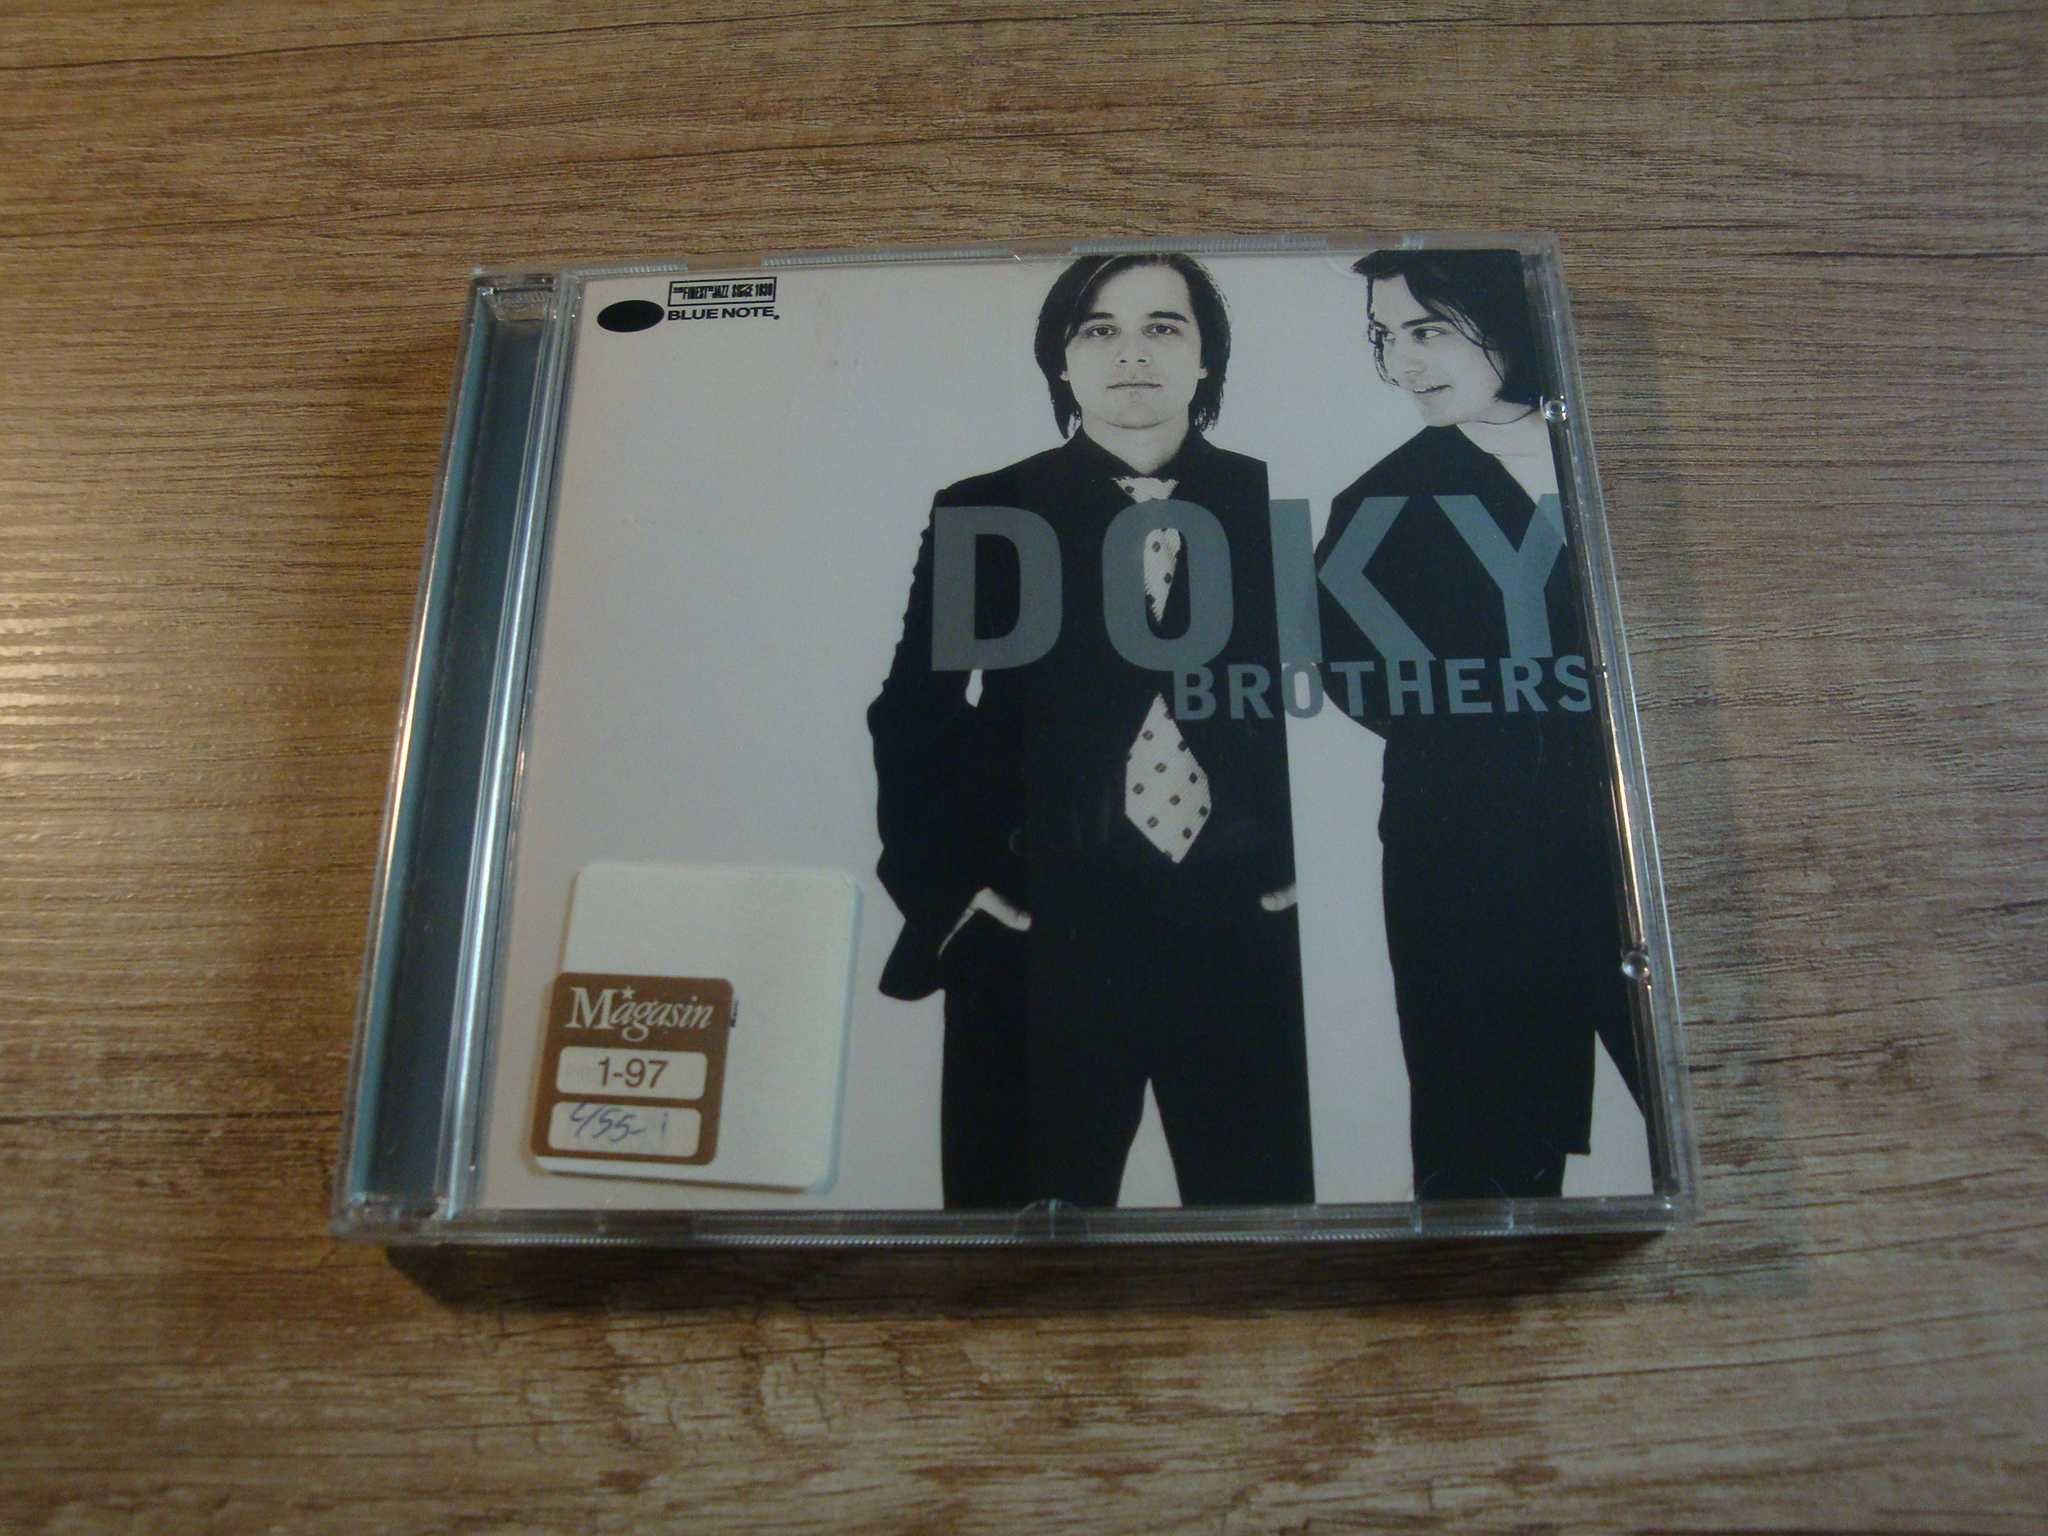 Doky Brothers – Doky Brothers (Smooth Jazz)